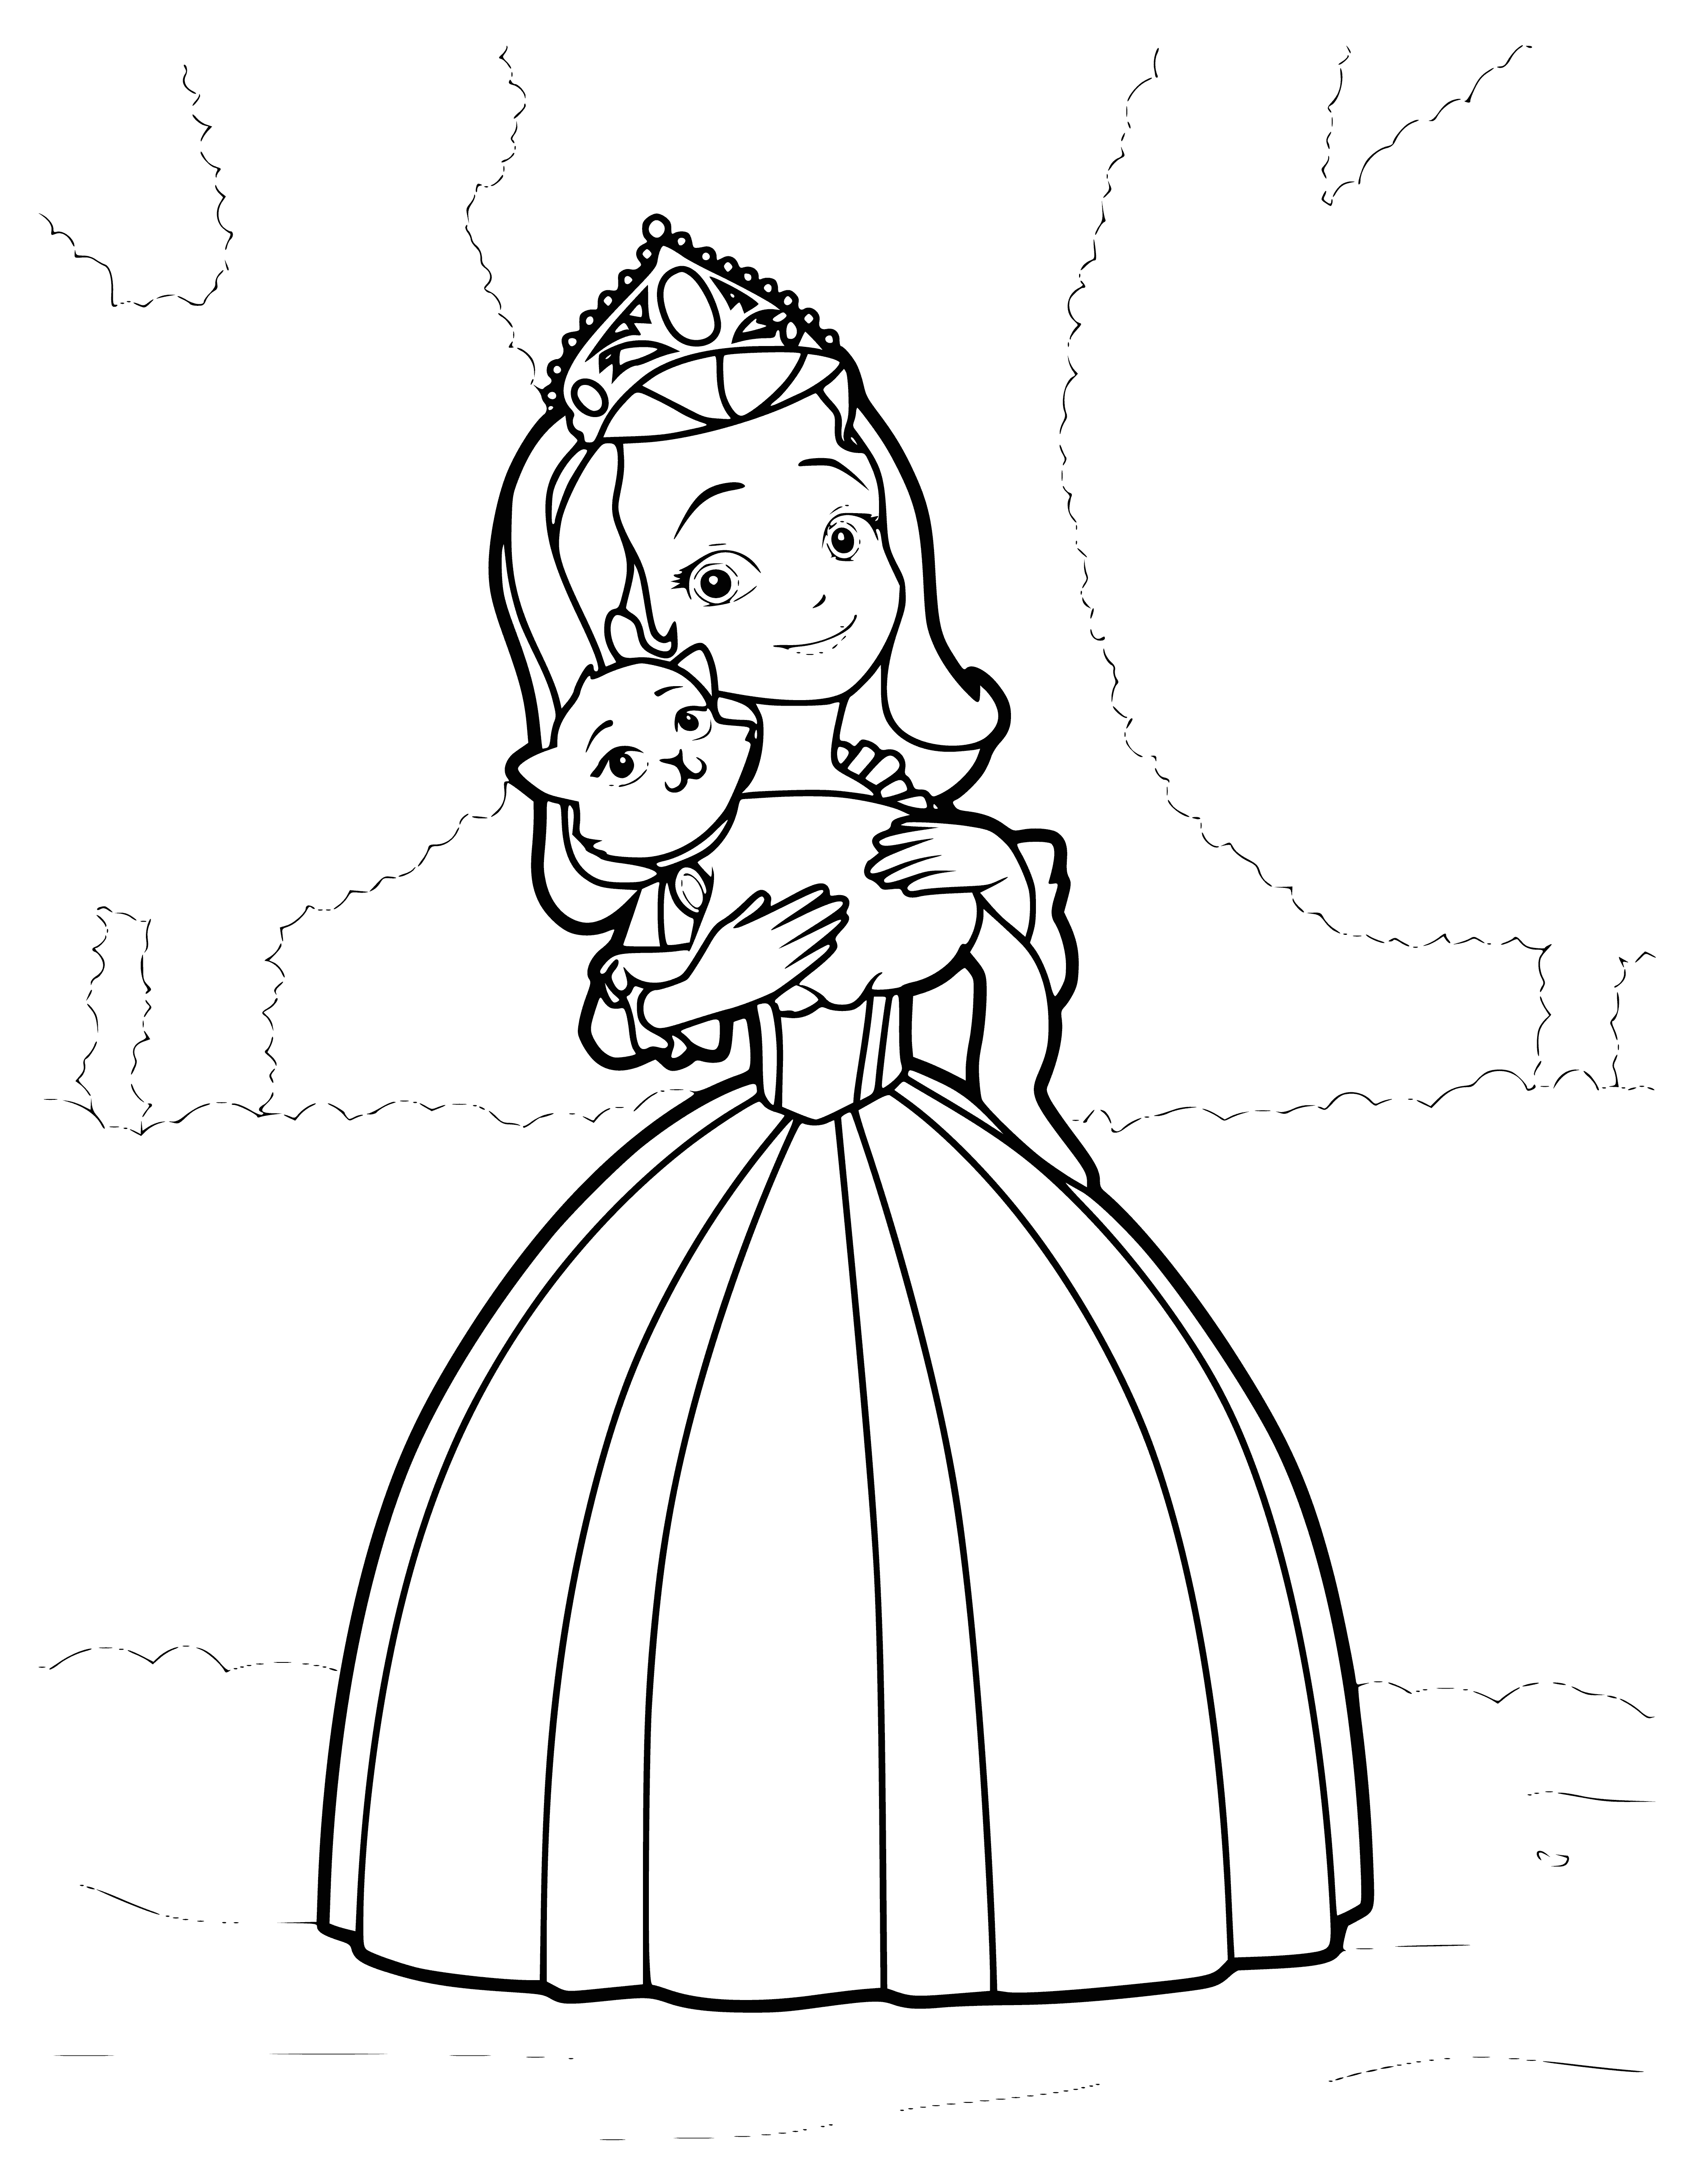 Princess Amber with a kitten coloring page